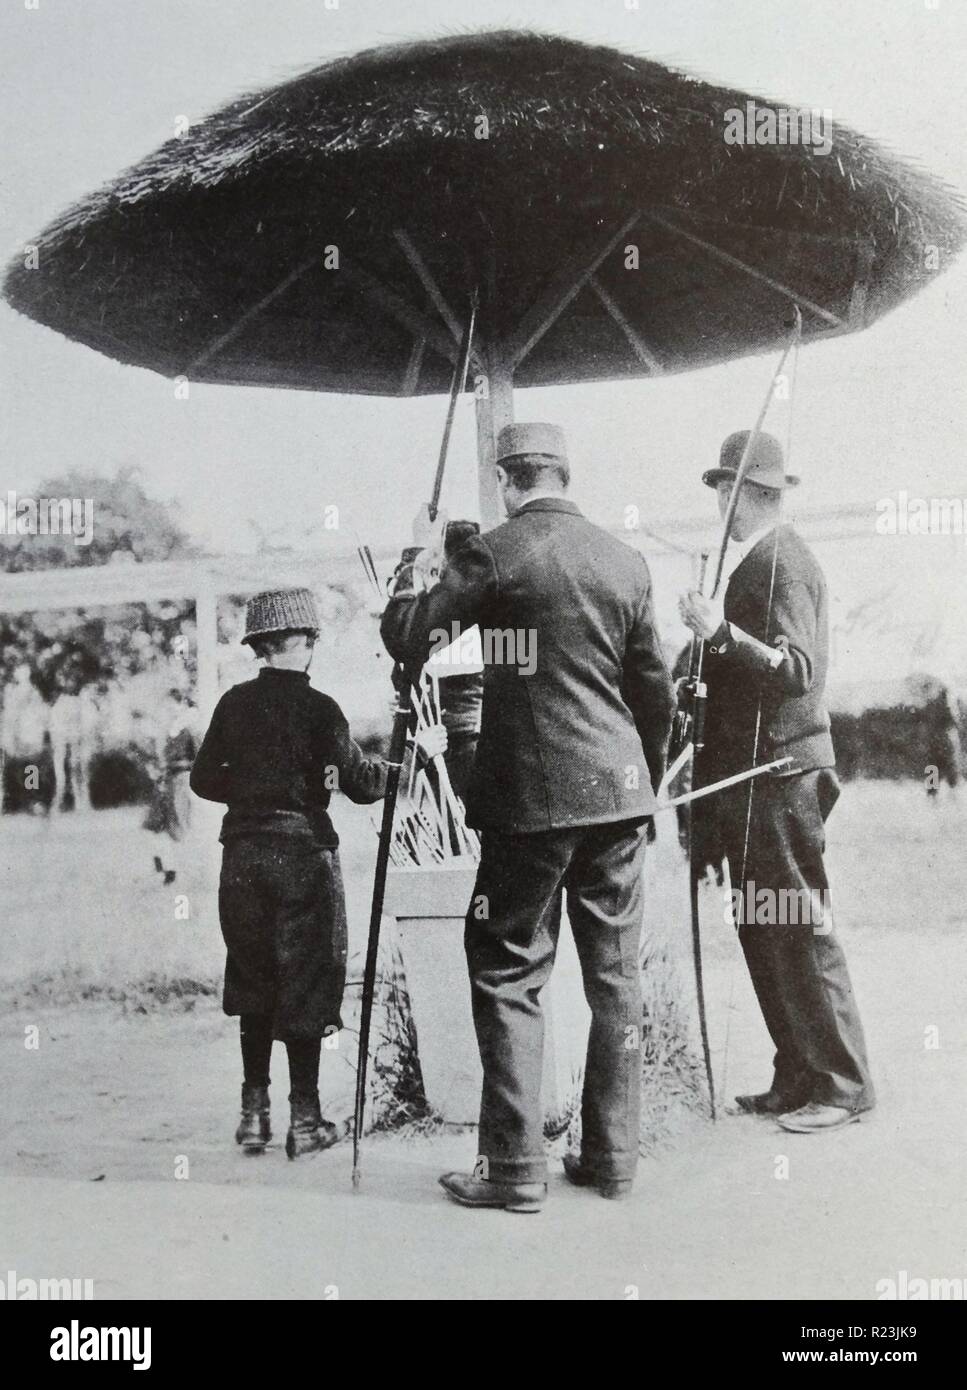 The mushroom head protector used in an archery contest, Belgium 1914. Under this structure we see two archers picking arrows for their next shot. The leather 'brassards' on their arms are supposed to protect their wrists against injury caused by the string when the arrow is released. Stock Photo